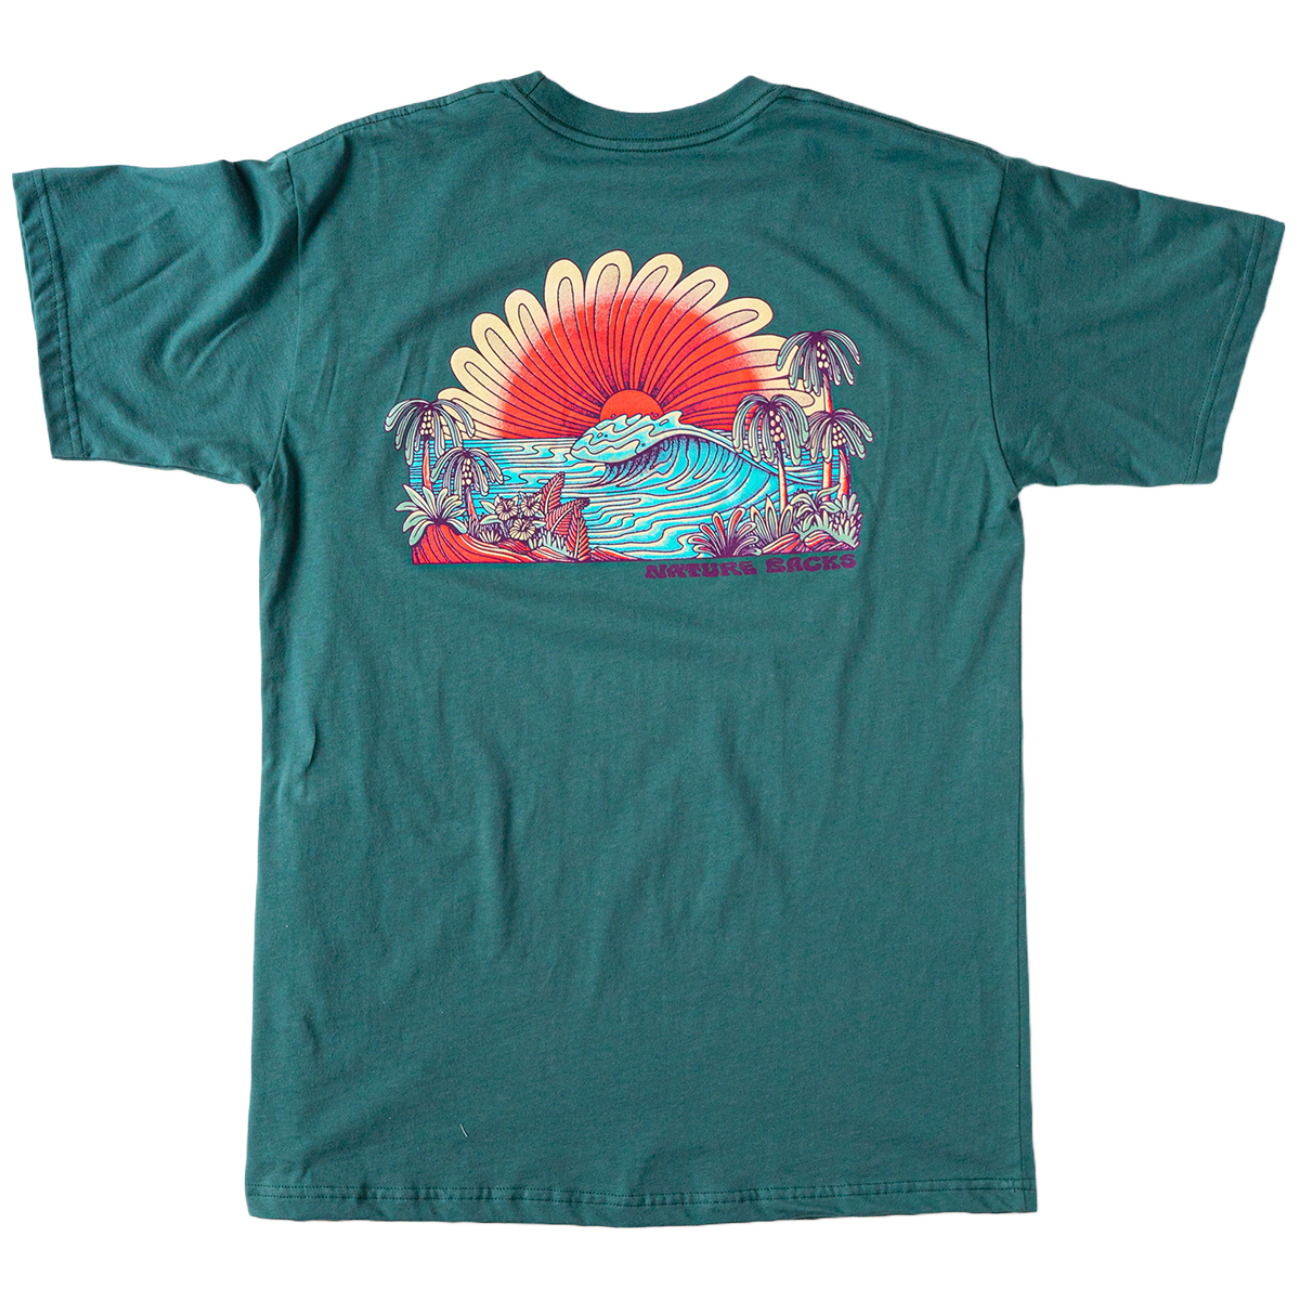 Nature Backs Limited Edition Short Sleeve 100% Organic Cotton T-Shirt | Limited Swell Spruce Short Sleeve made with Eco-Friendly Fibers Sustainably made in the USA 